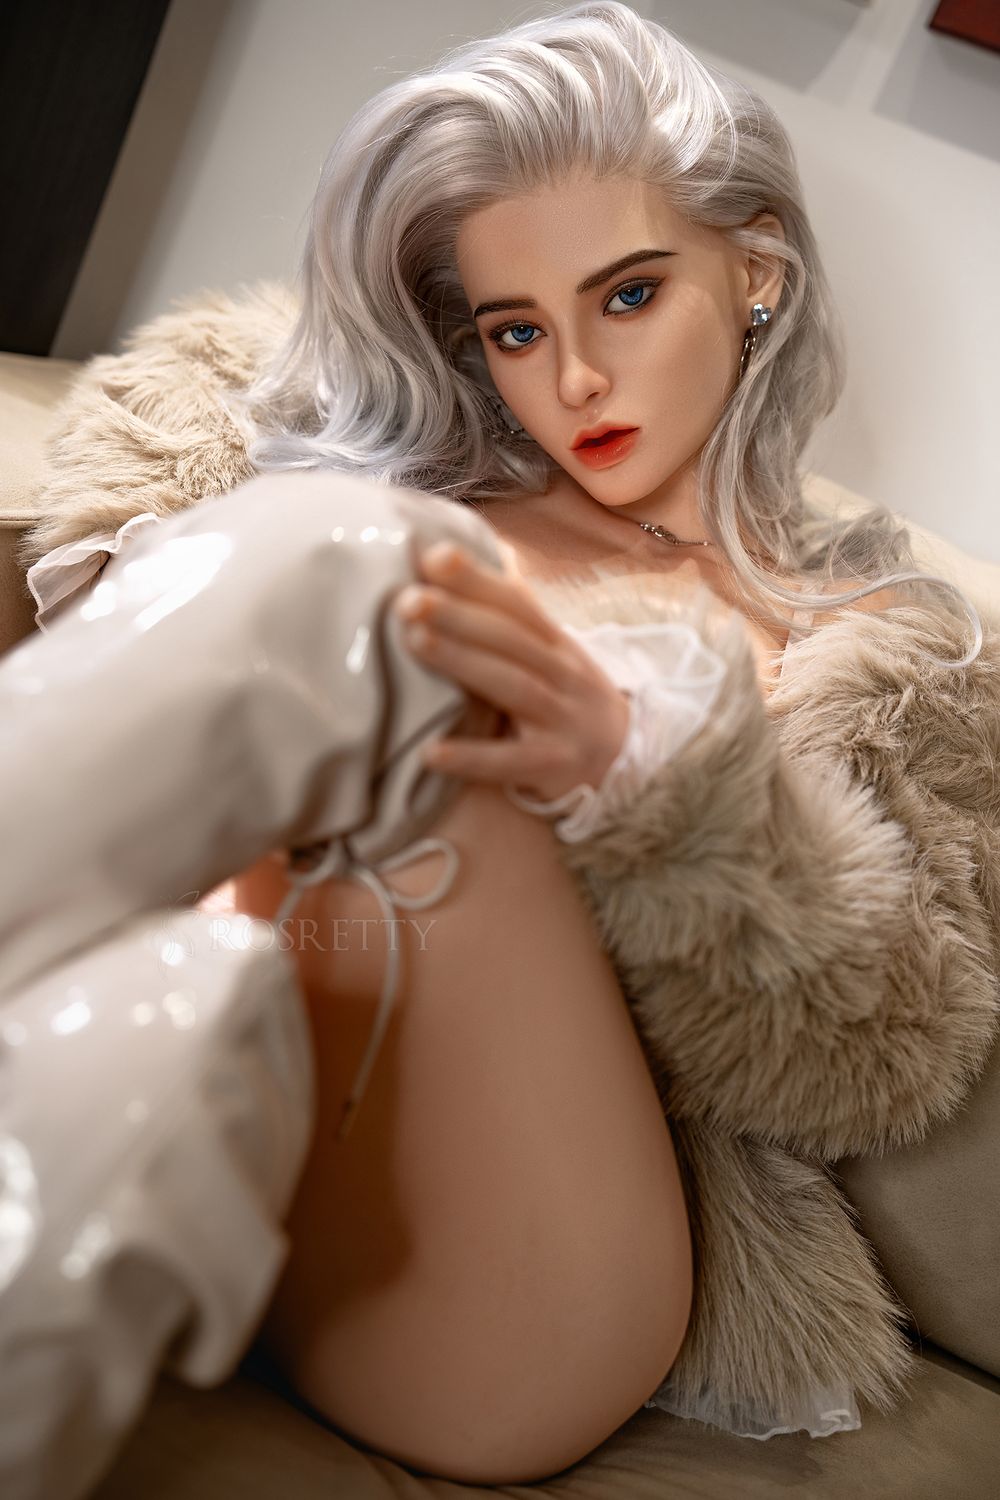 Cain - 5ft 5/164cm ROS Sex Doll With Option To Add Blowjob E-Hips Sucking 3 In 1-DreamLoveDoll